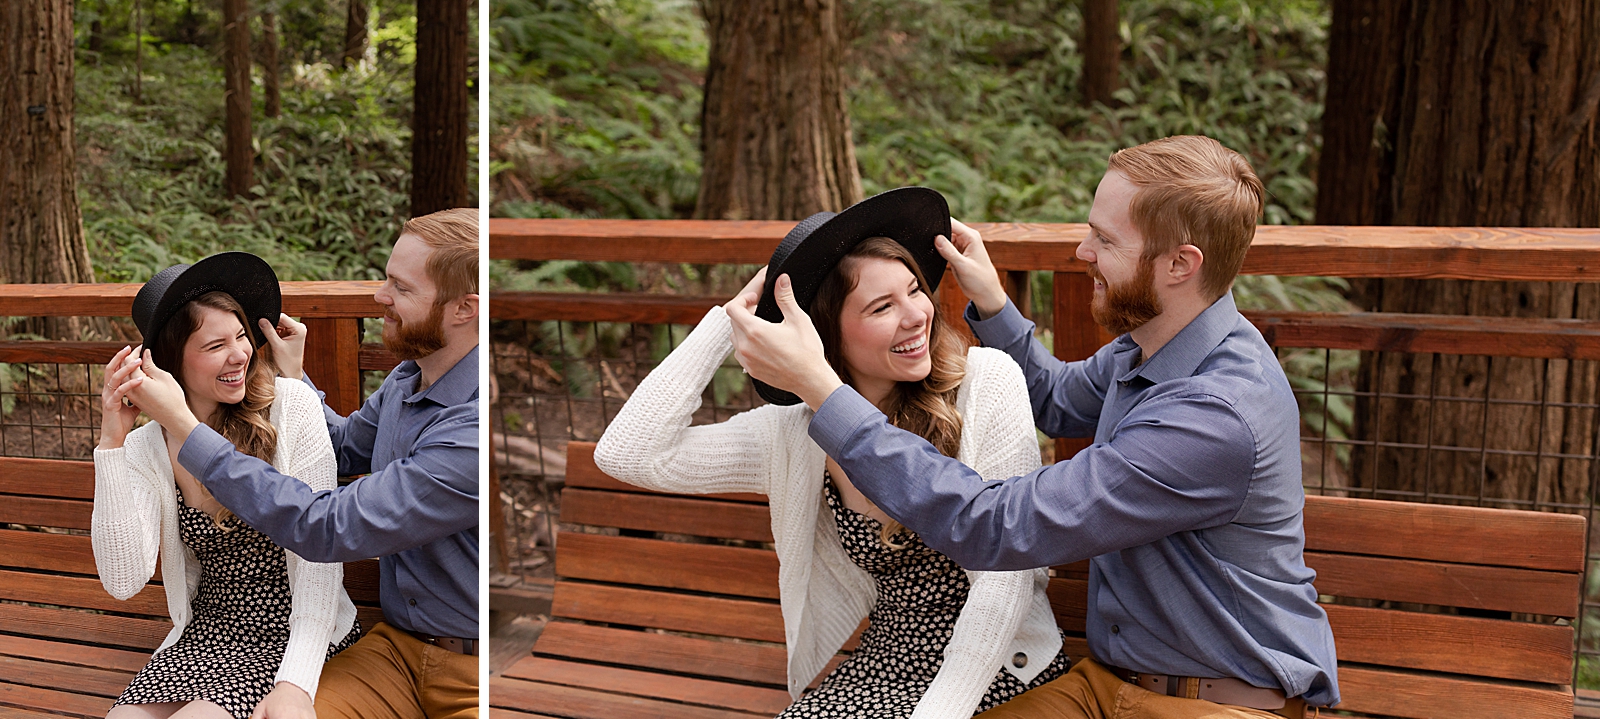 Man putting hat on lady while sitting on wood bench